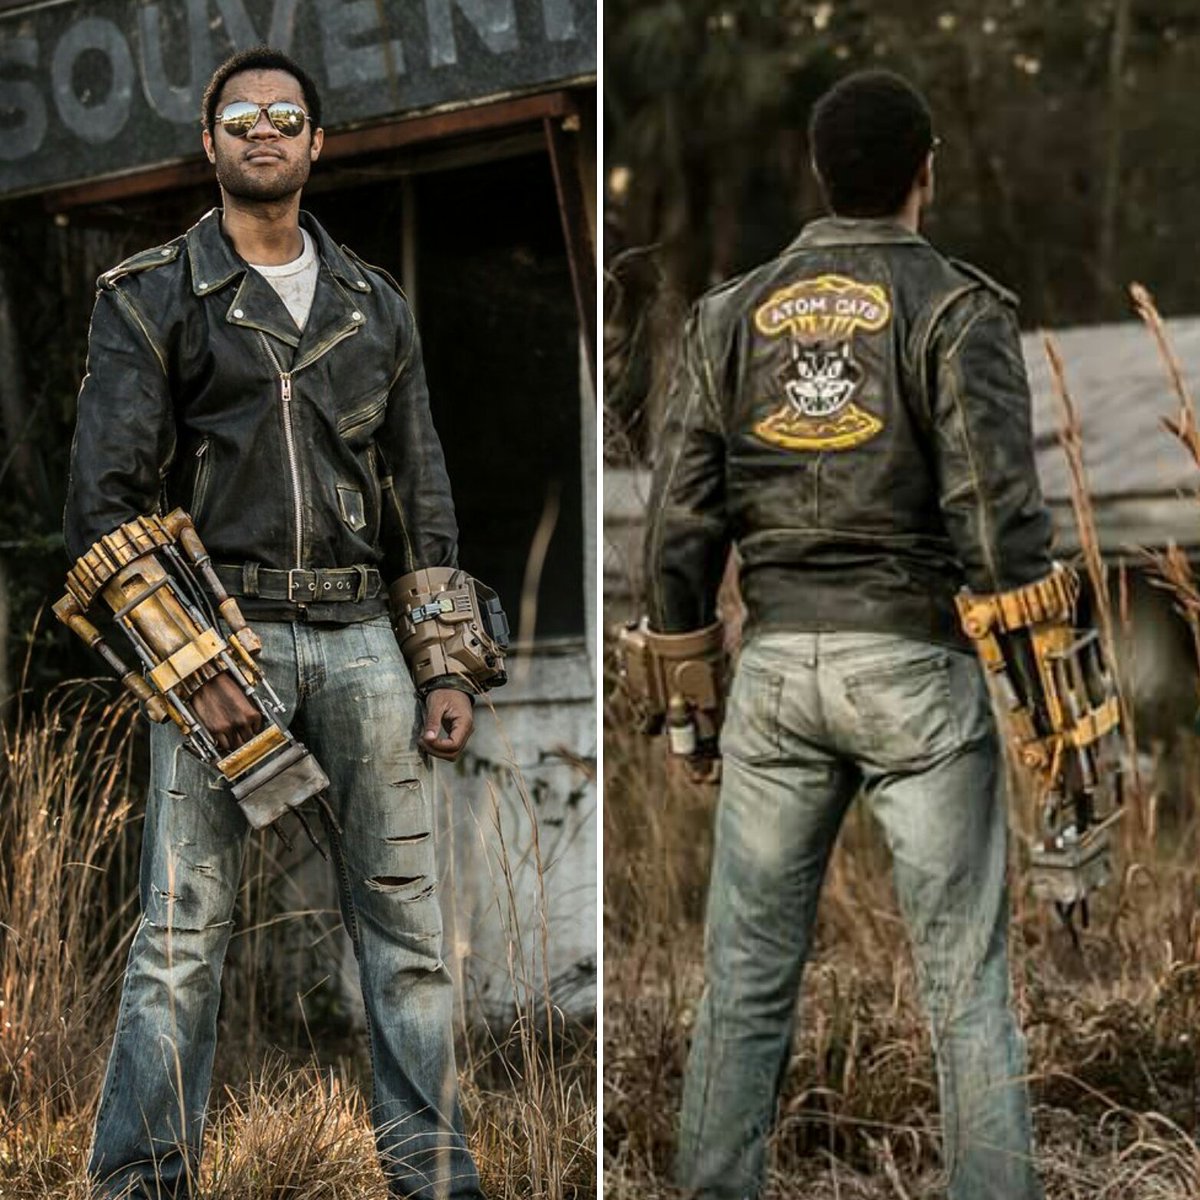 K Mose Atom Cats Is The Way Of Cool Atomcats Fallout Fallout4 Bethesda Cosplay Cosplayer Fallout Bethesda Bethesdastudios T Co Utcky4bwhg